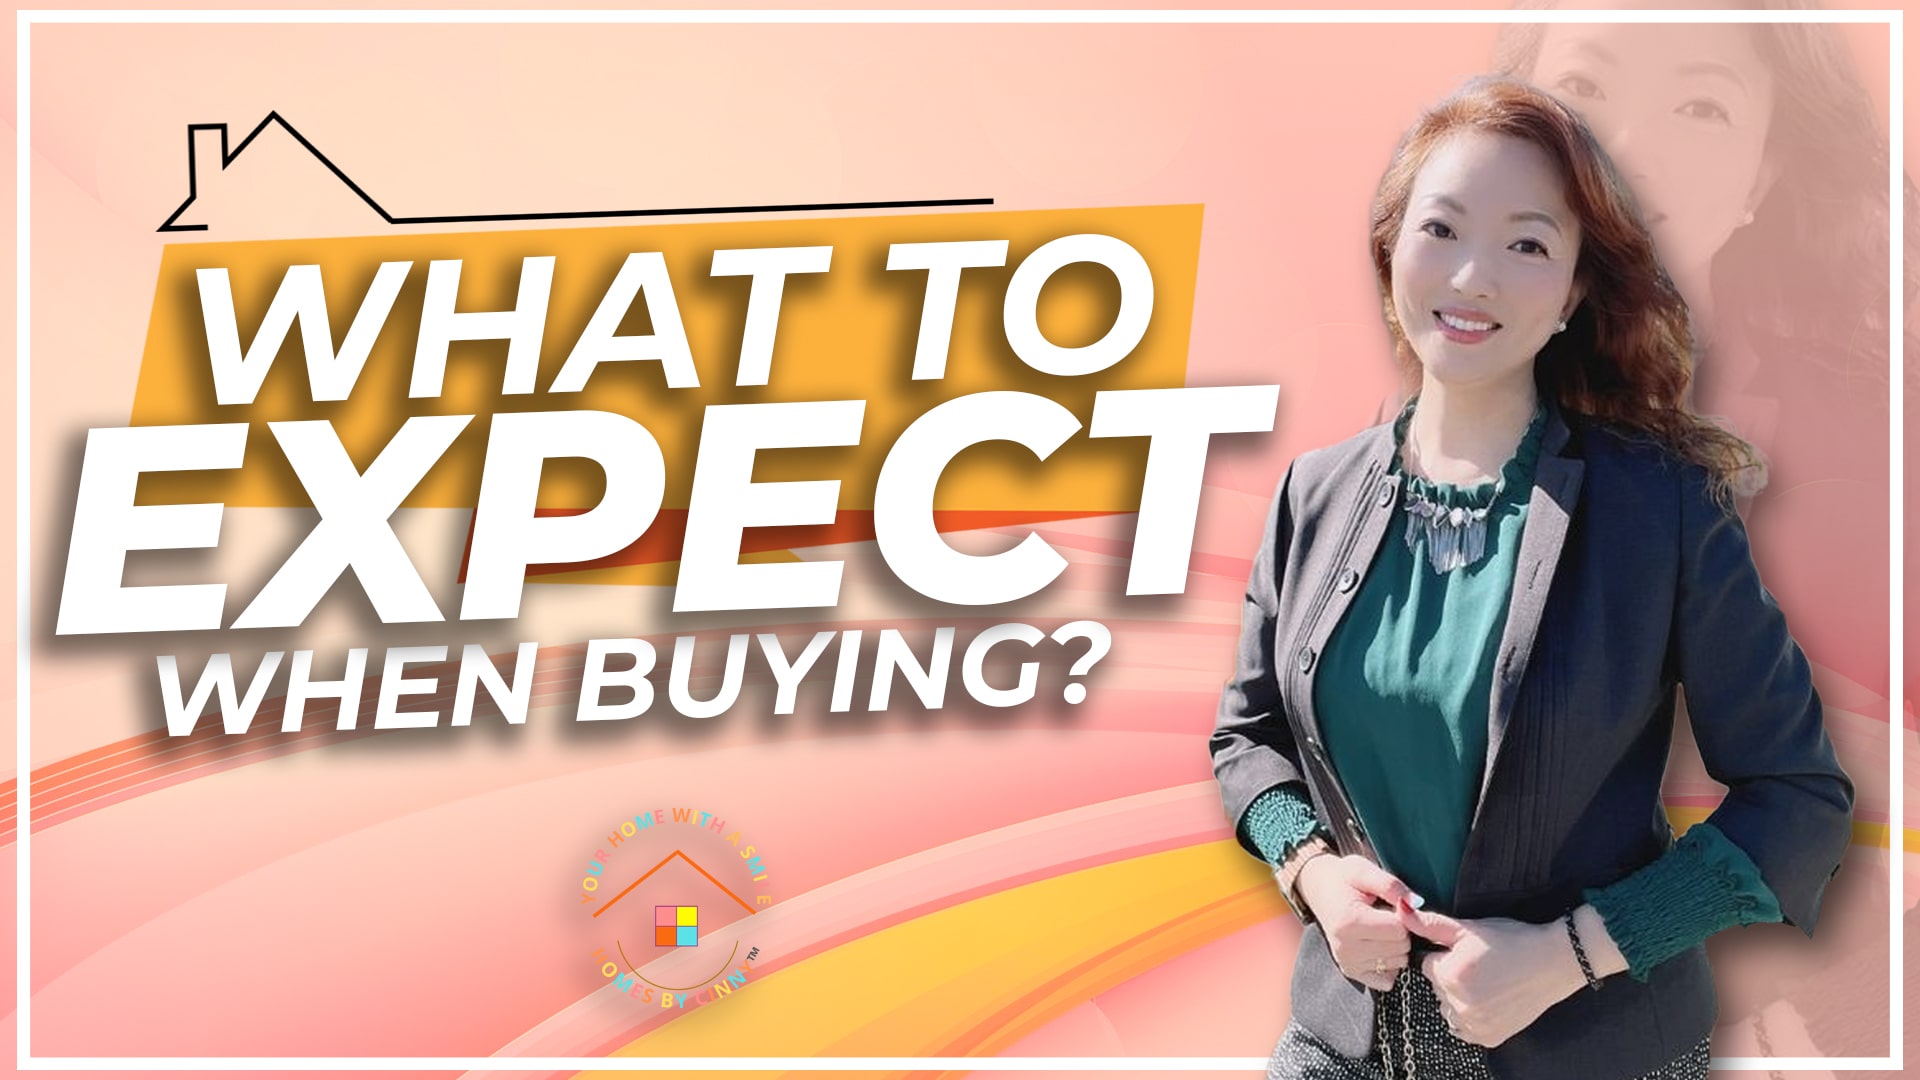 What to expect when buying